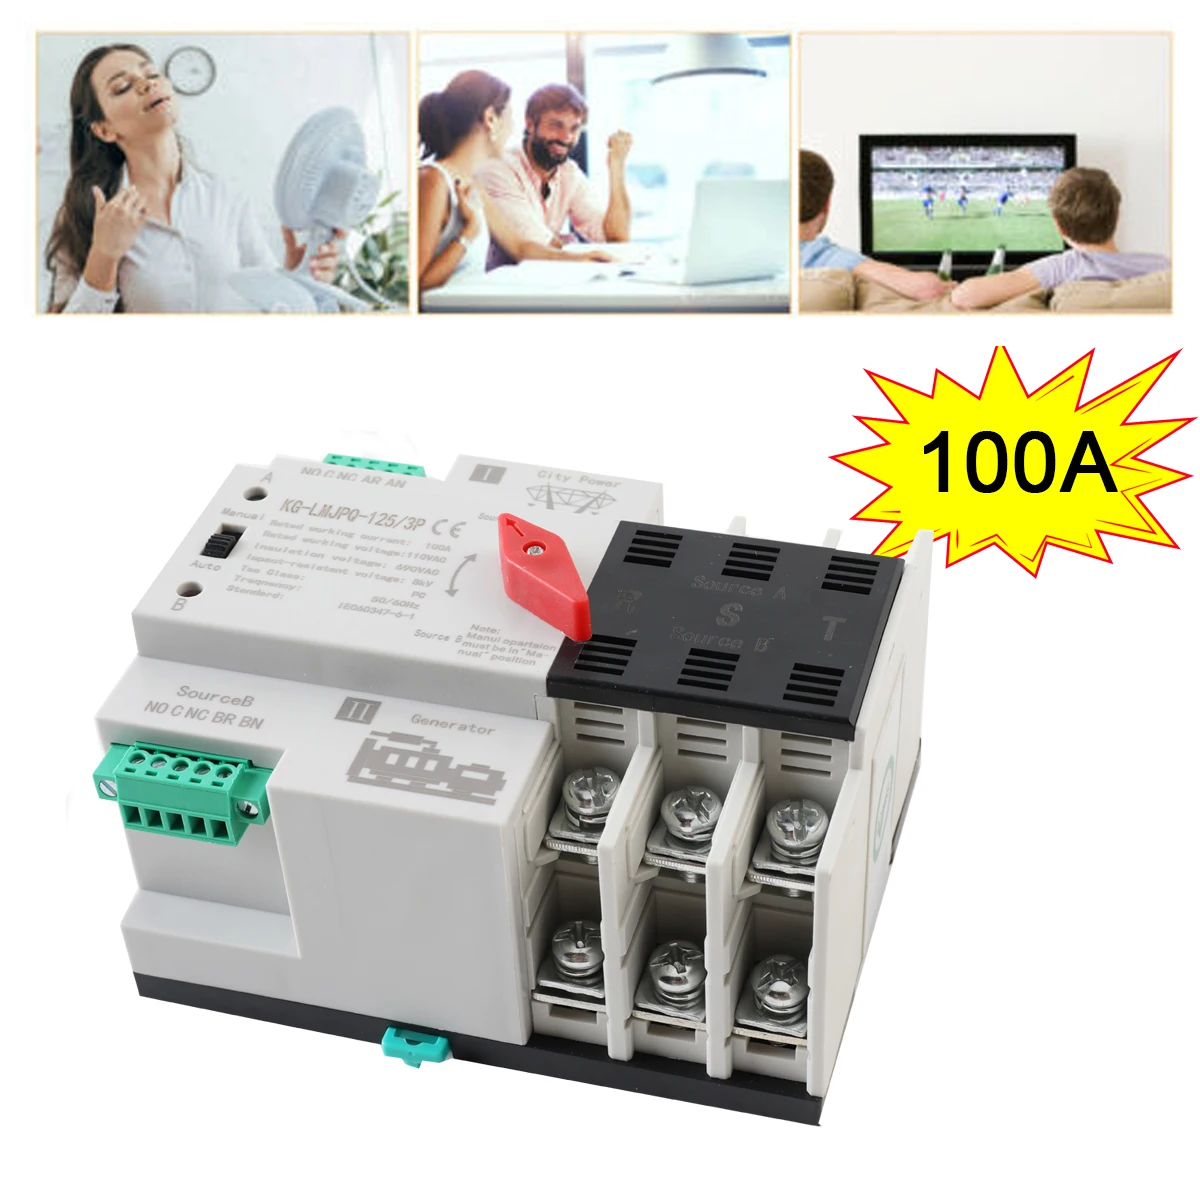 

100A Dual Power Automatic Transfer Switch 3P Electrical Selector Switches 110V Changeover Circuit Breaker Uninterrupted Power